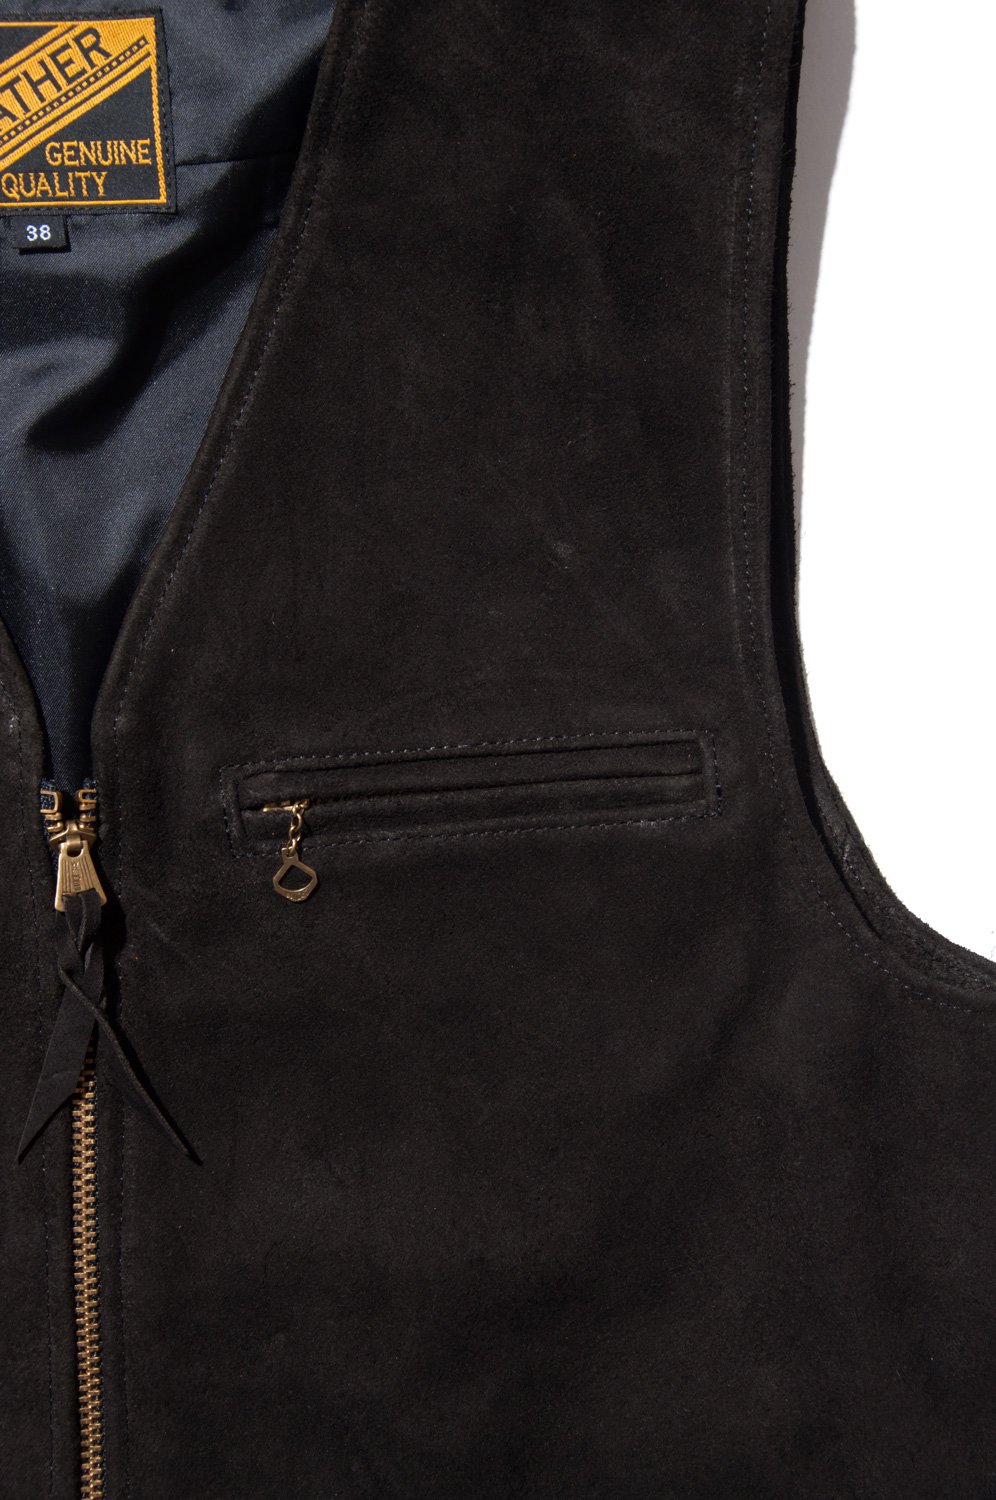 Y'2 LEATHER(ワイツーレザー) カウスエードベスト COW SUEDE ZIP VEST